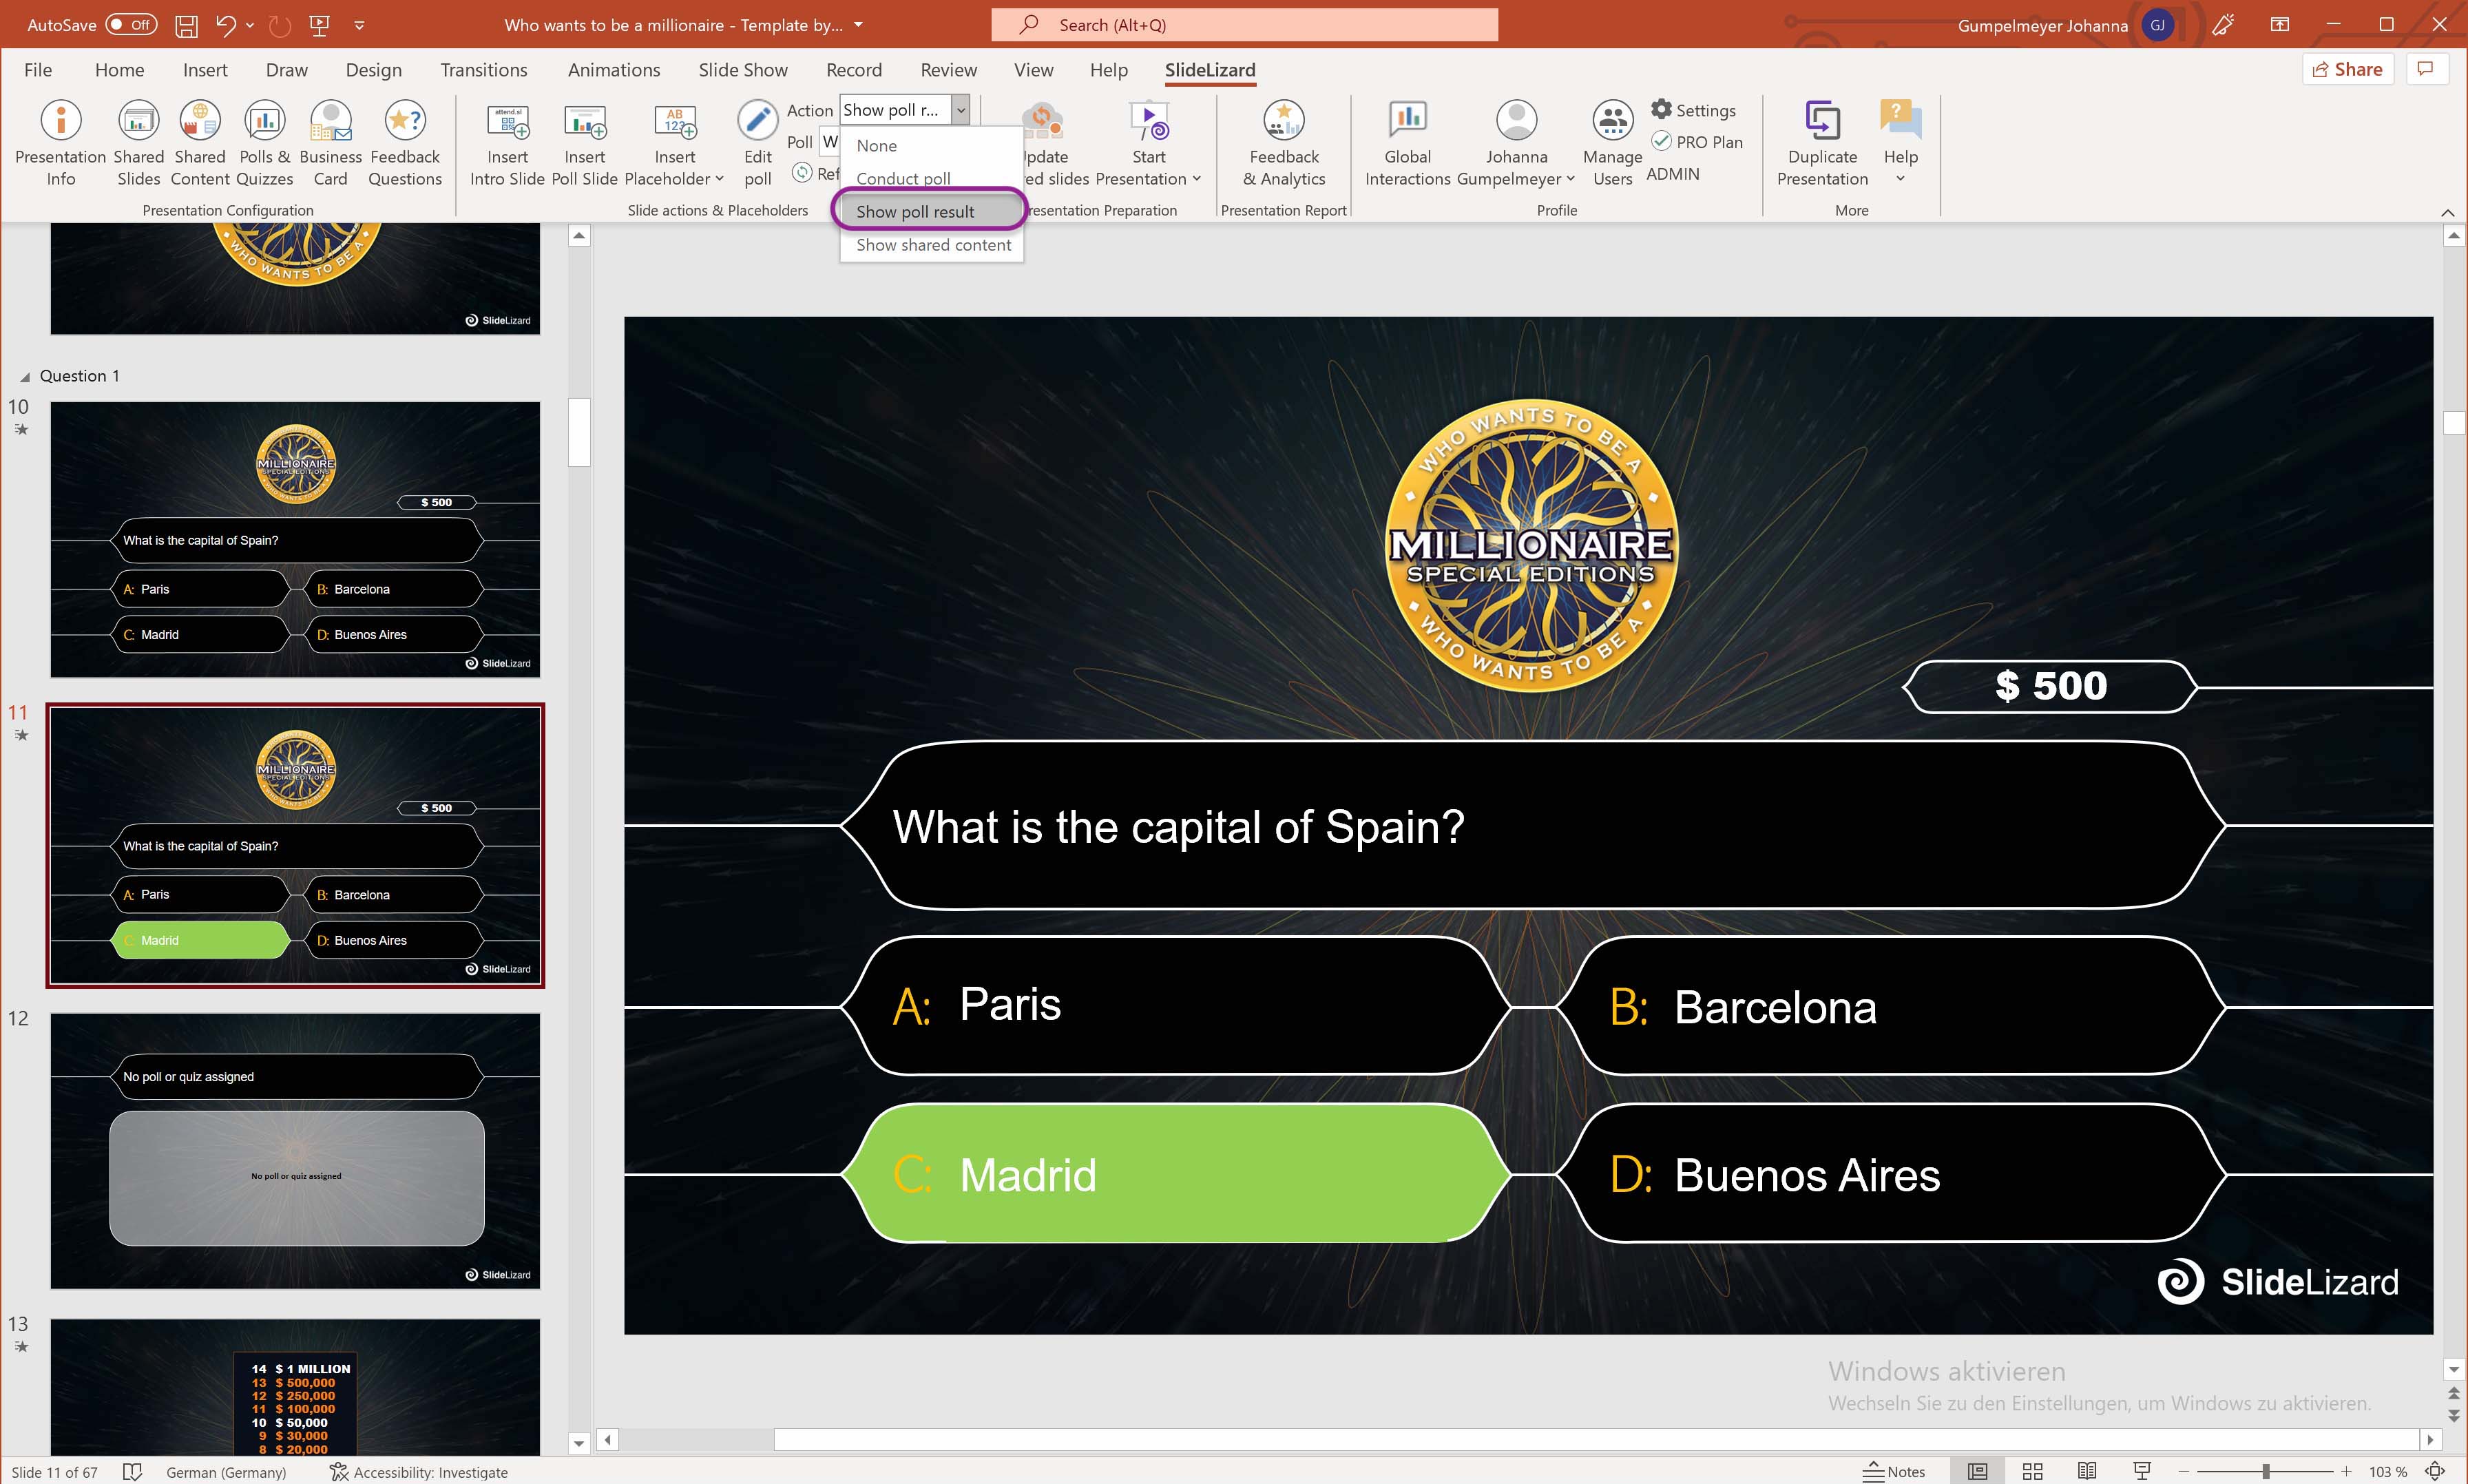 Who Wants to be a Millionaire PowerPoint Template | SlideLizard®